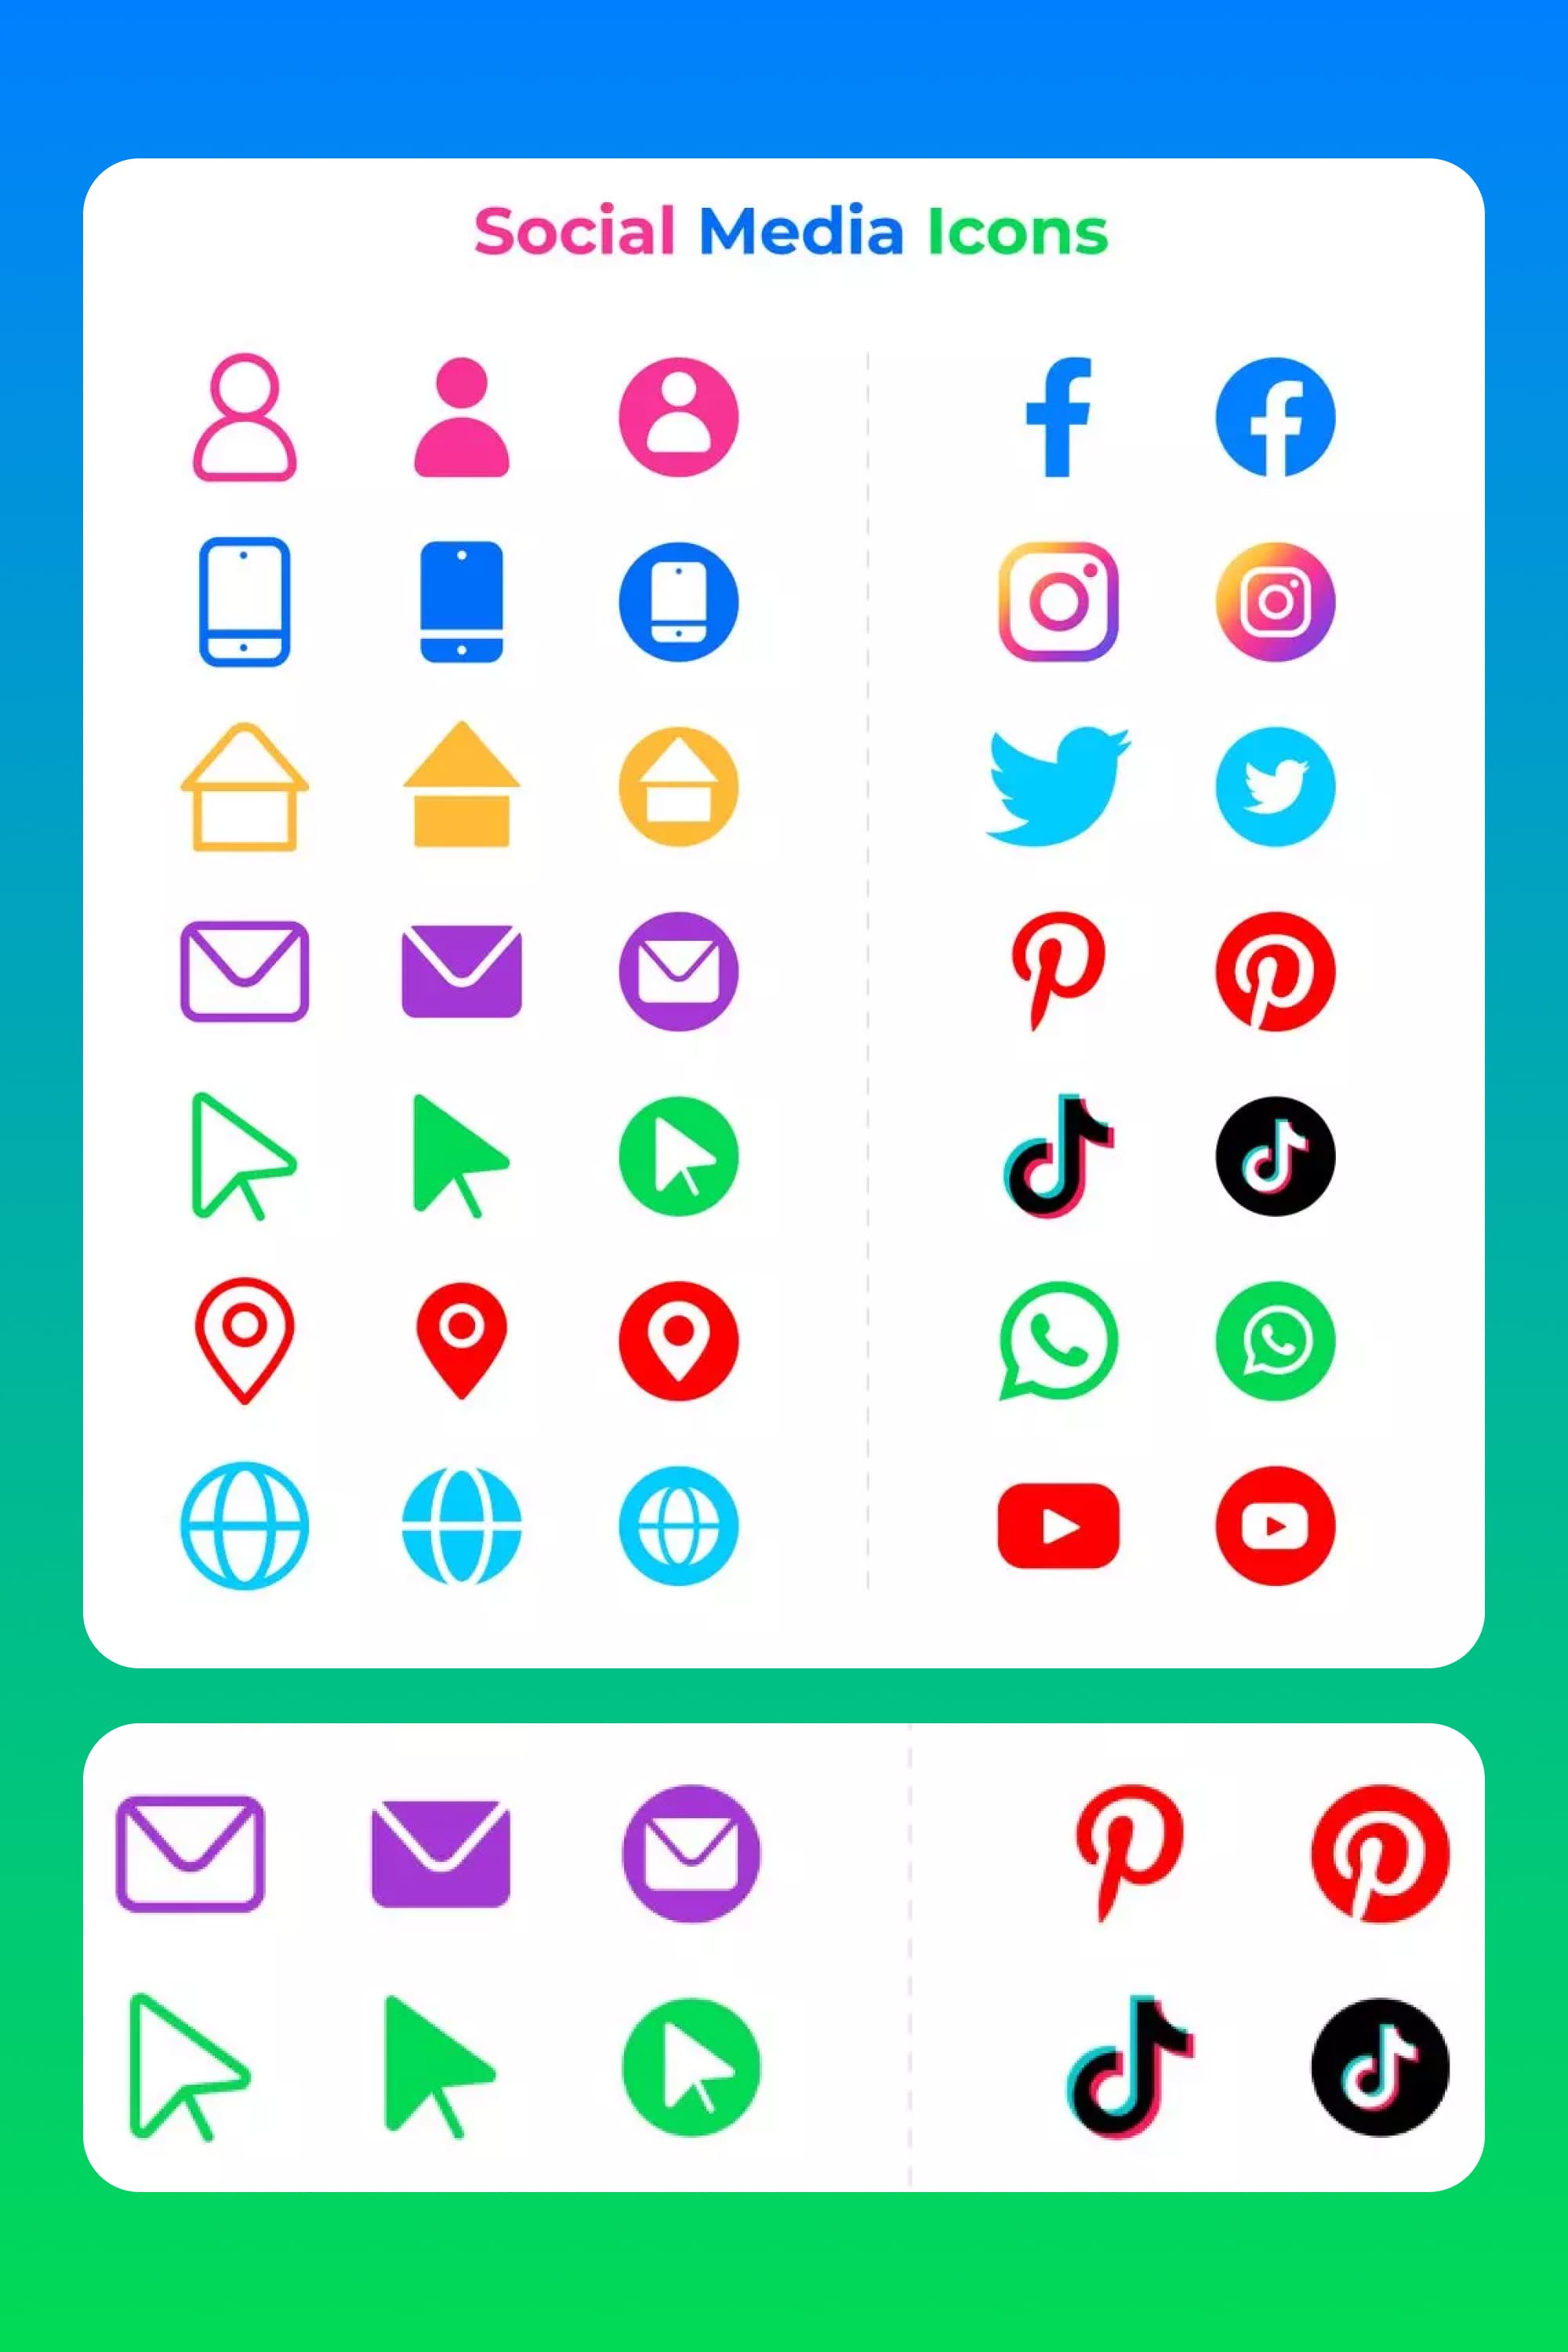 Color icons for social networks on a blue-green background.